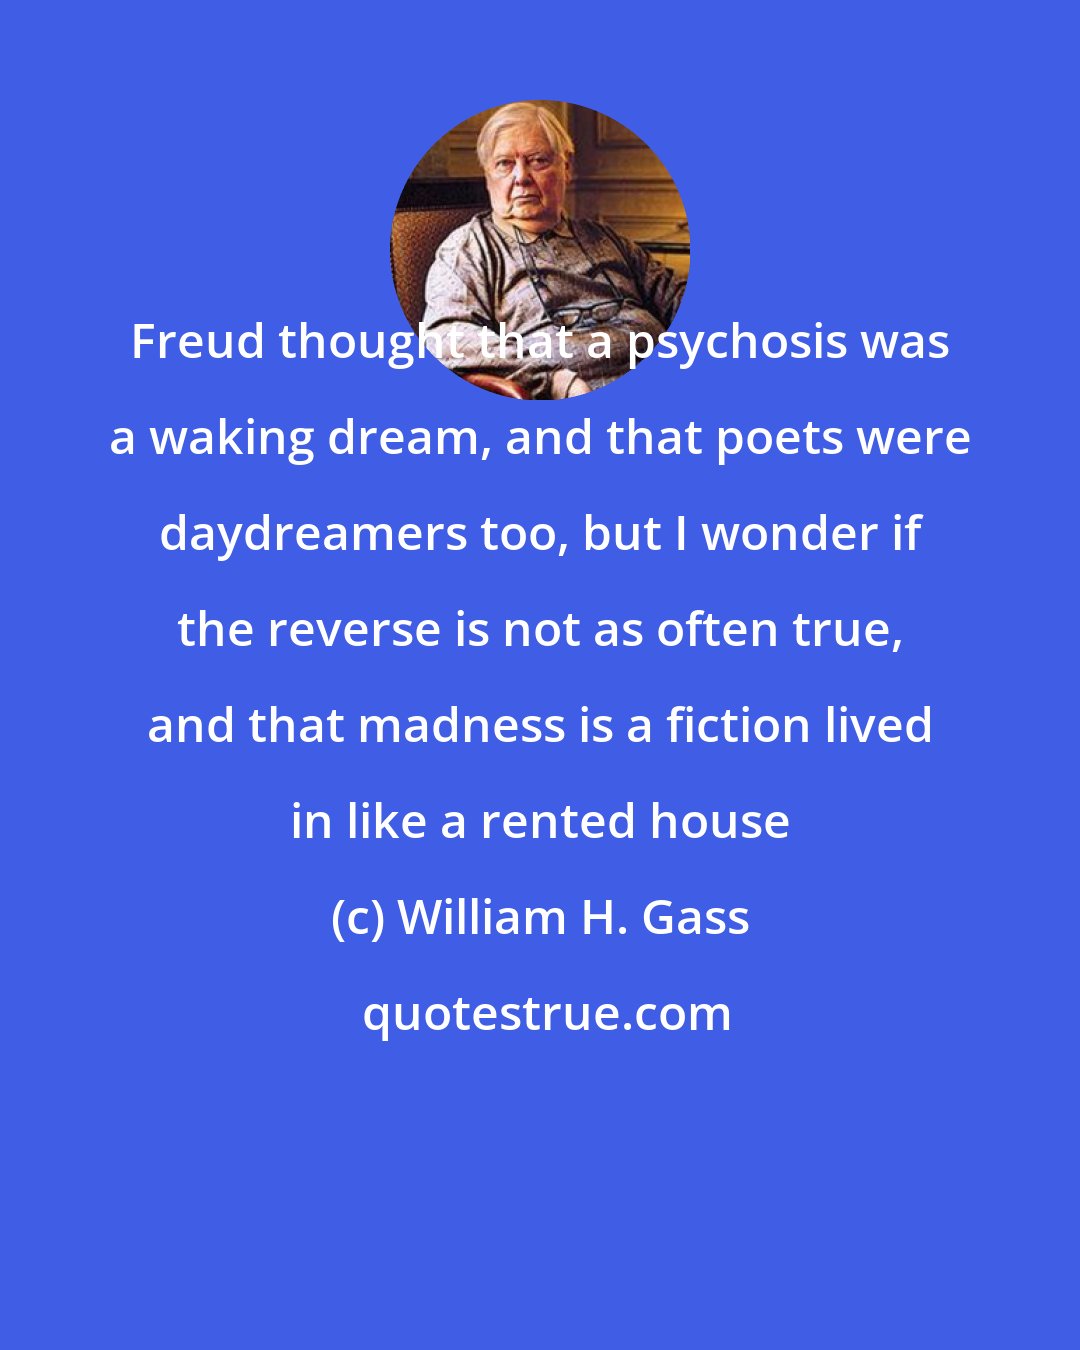 William H. Gass: Freud thought that a psychosis was a waking dream, and that poets were daydreamers too, but I wonder if the reverse is not as often true, and that madness is a fiction lived in like a rented house